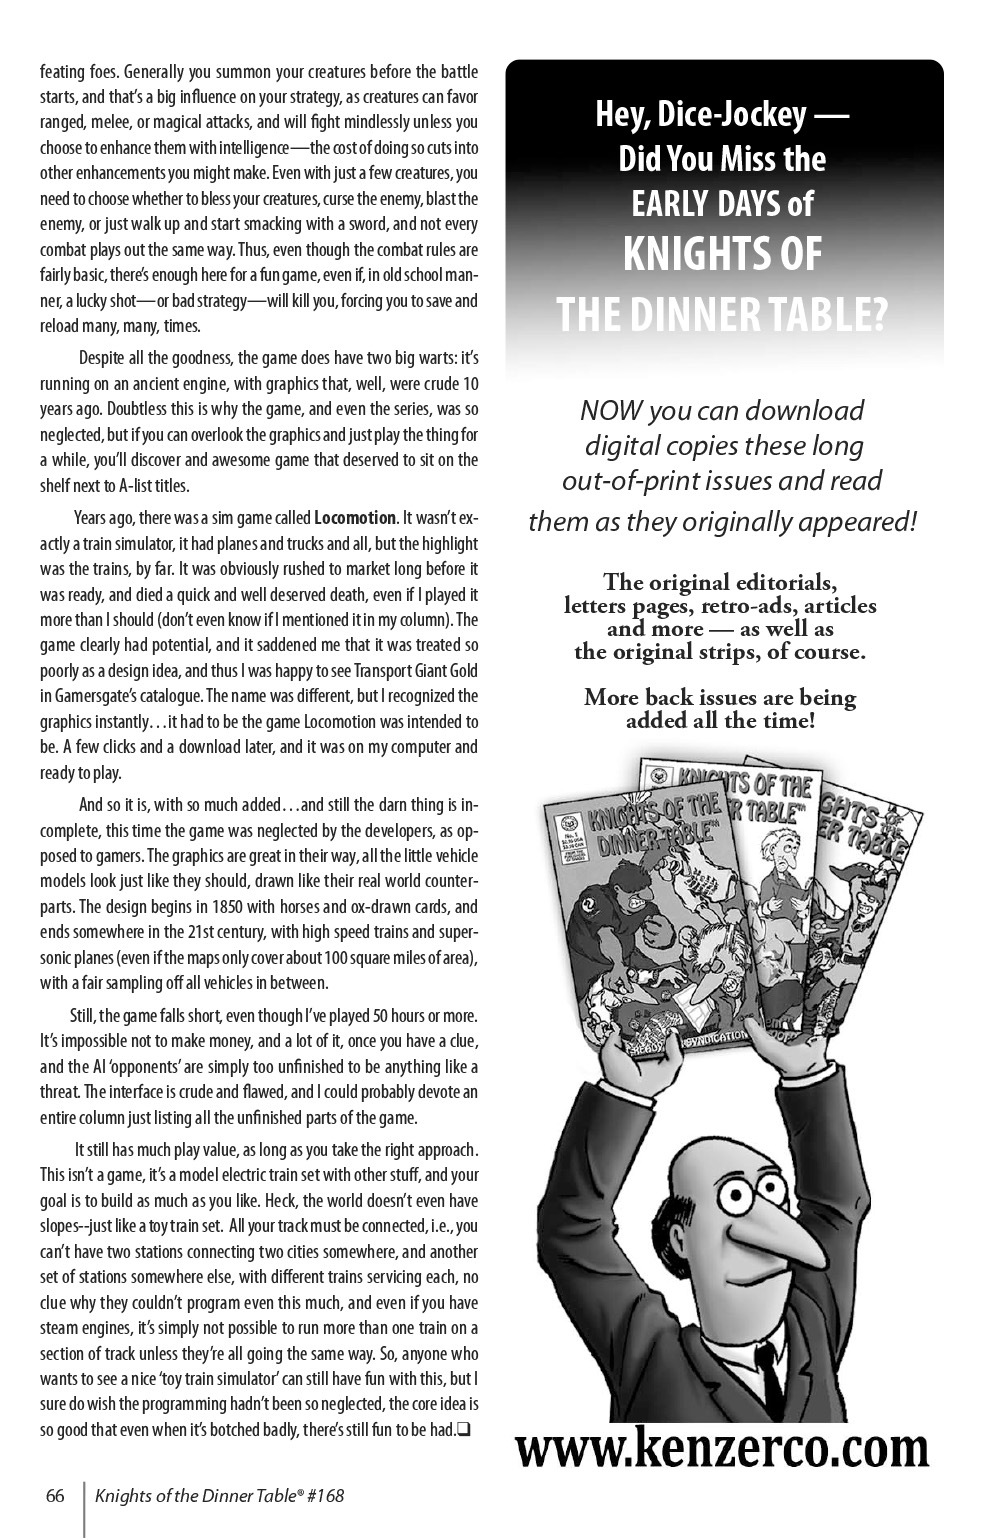 Read online Knights of the Dinner Table comic -  Issue #168 - 68